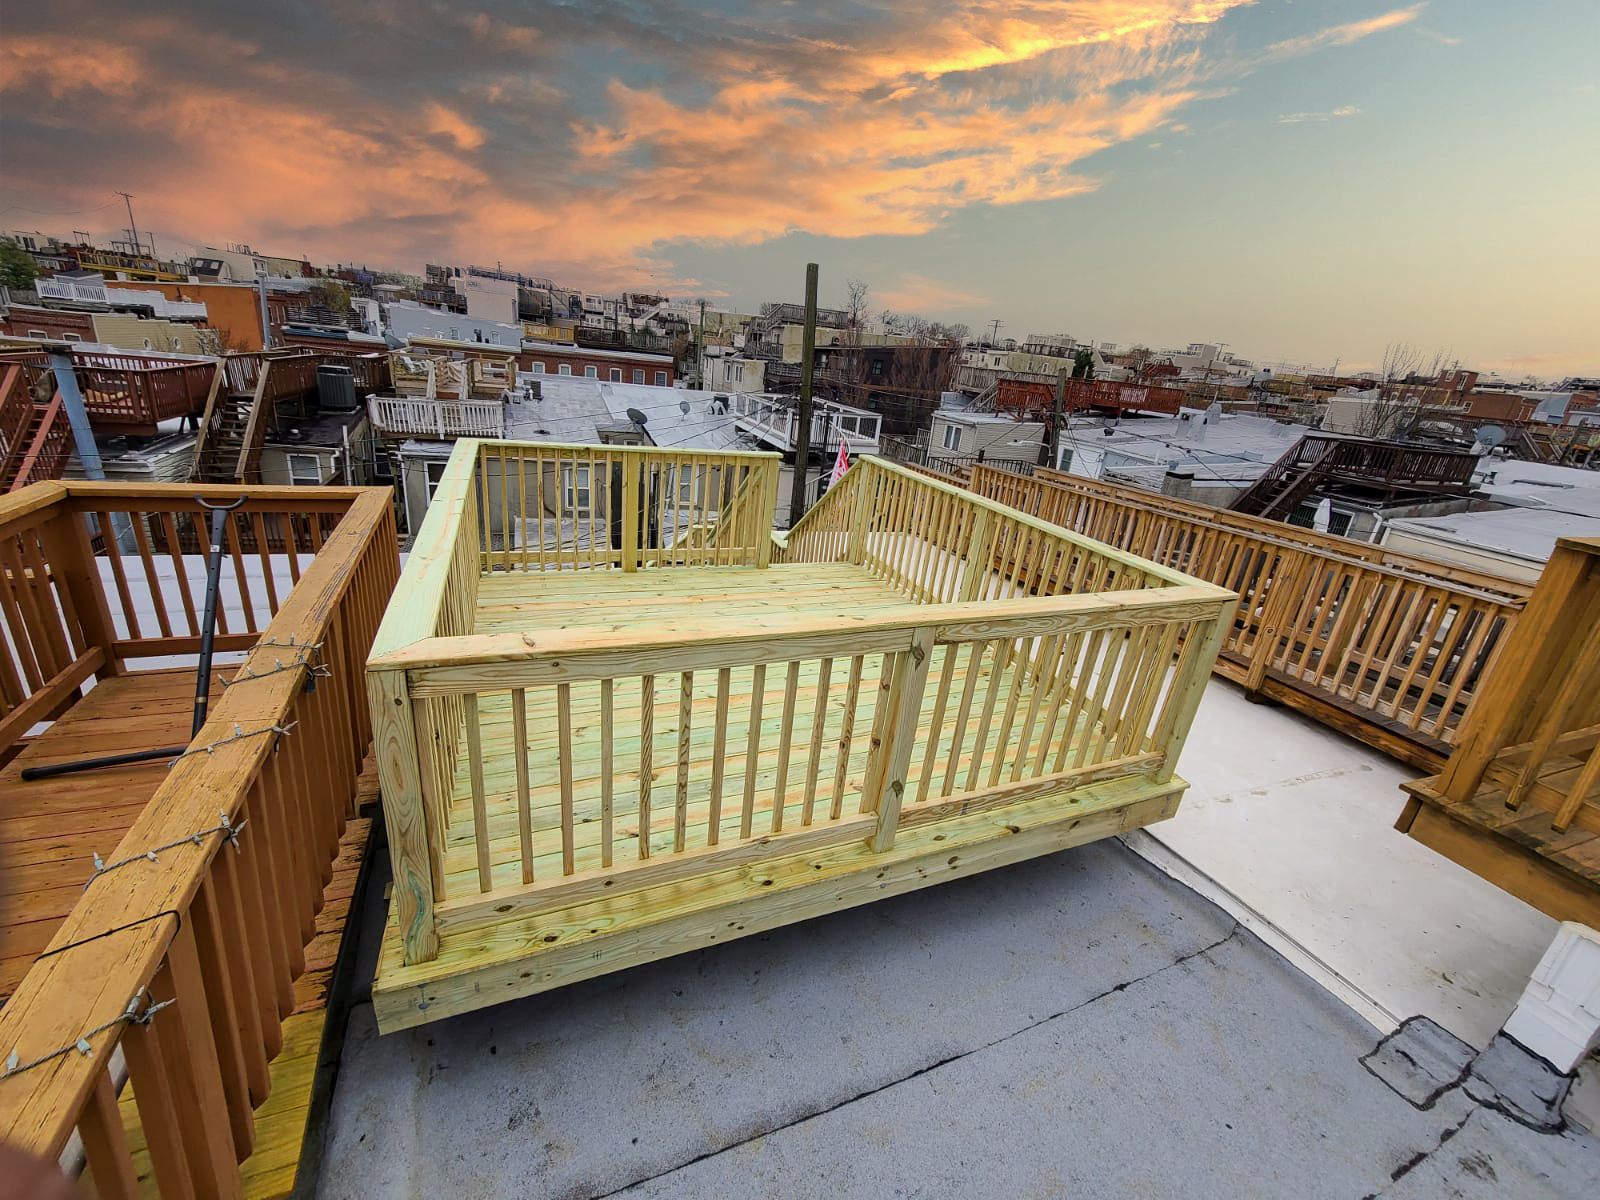 Stunning sunset colors viewed from a newly constructed rooftop deck in Baltimore, MD